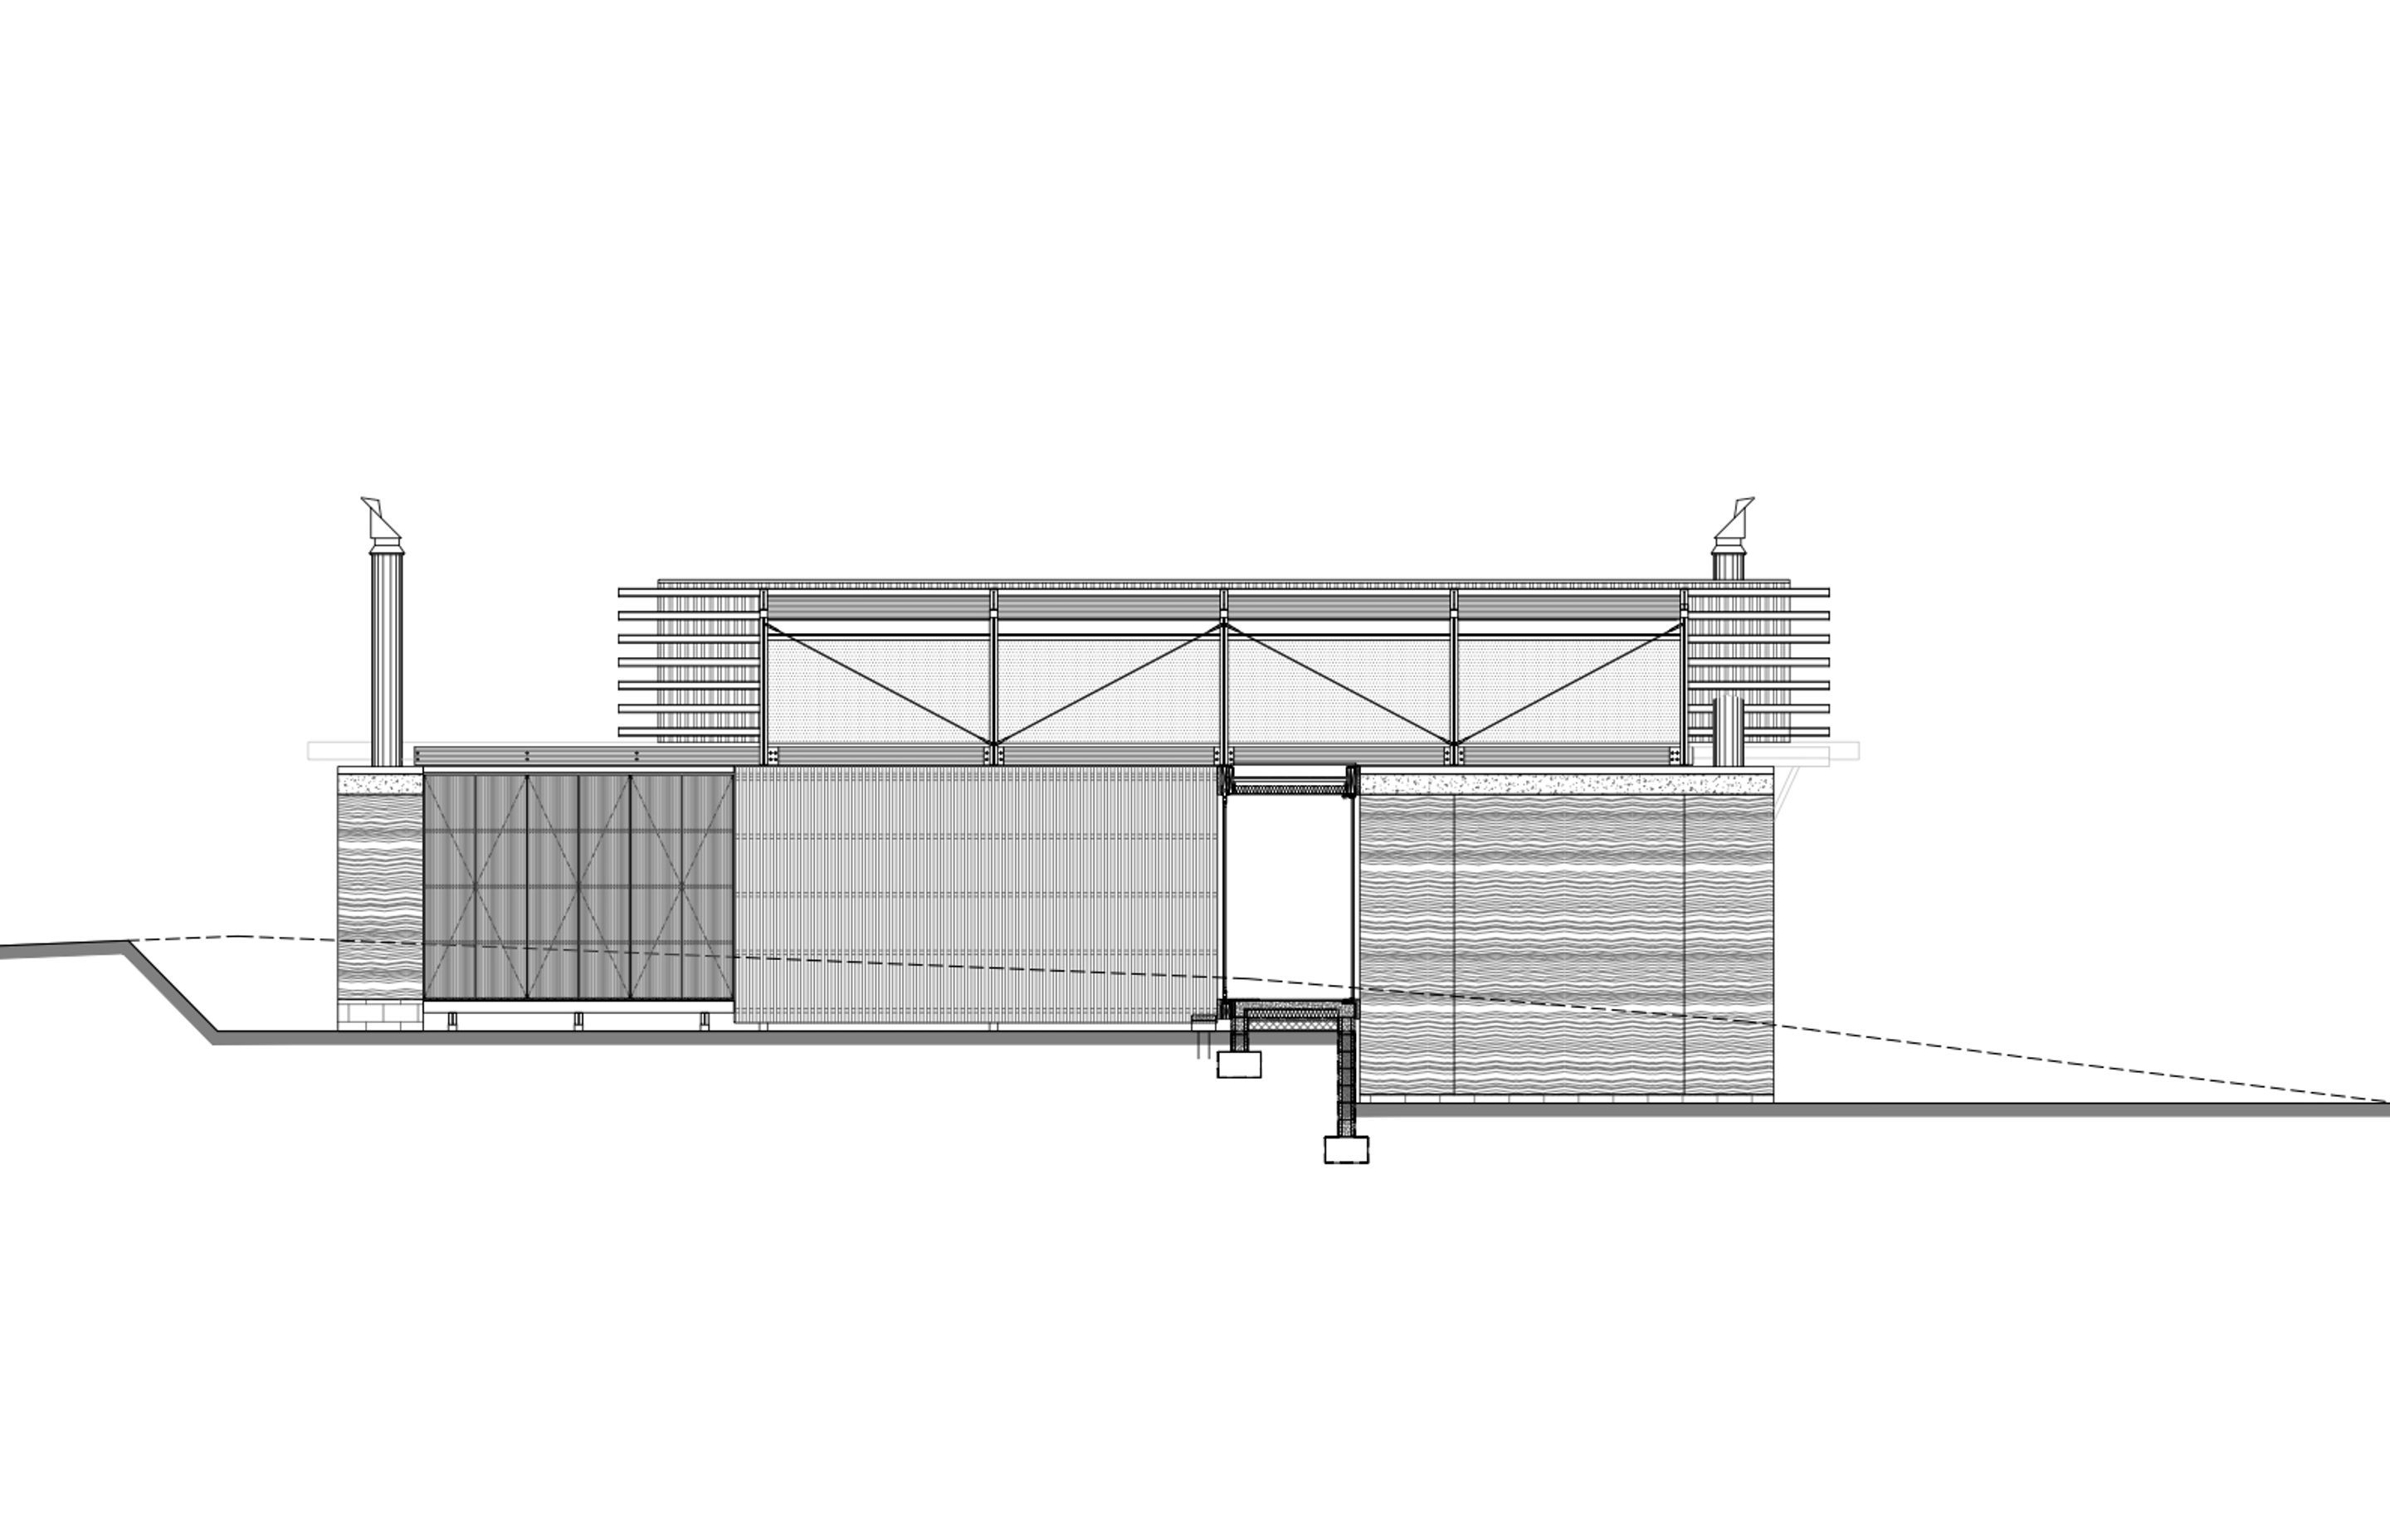 The west elevation of Tutukaka House, by Herbst Architects, is a sectional elevation through the glazed link between the bedroom and living wings.